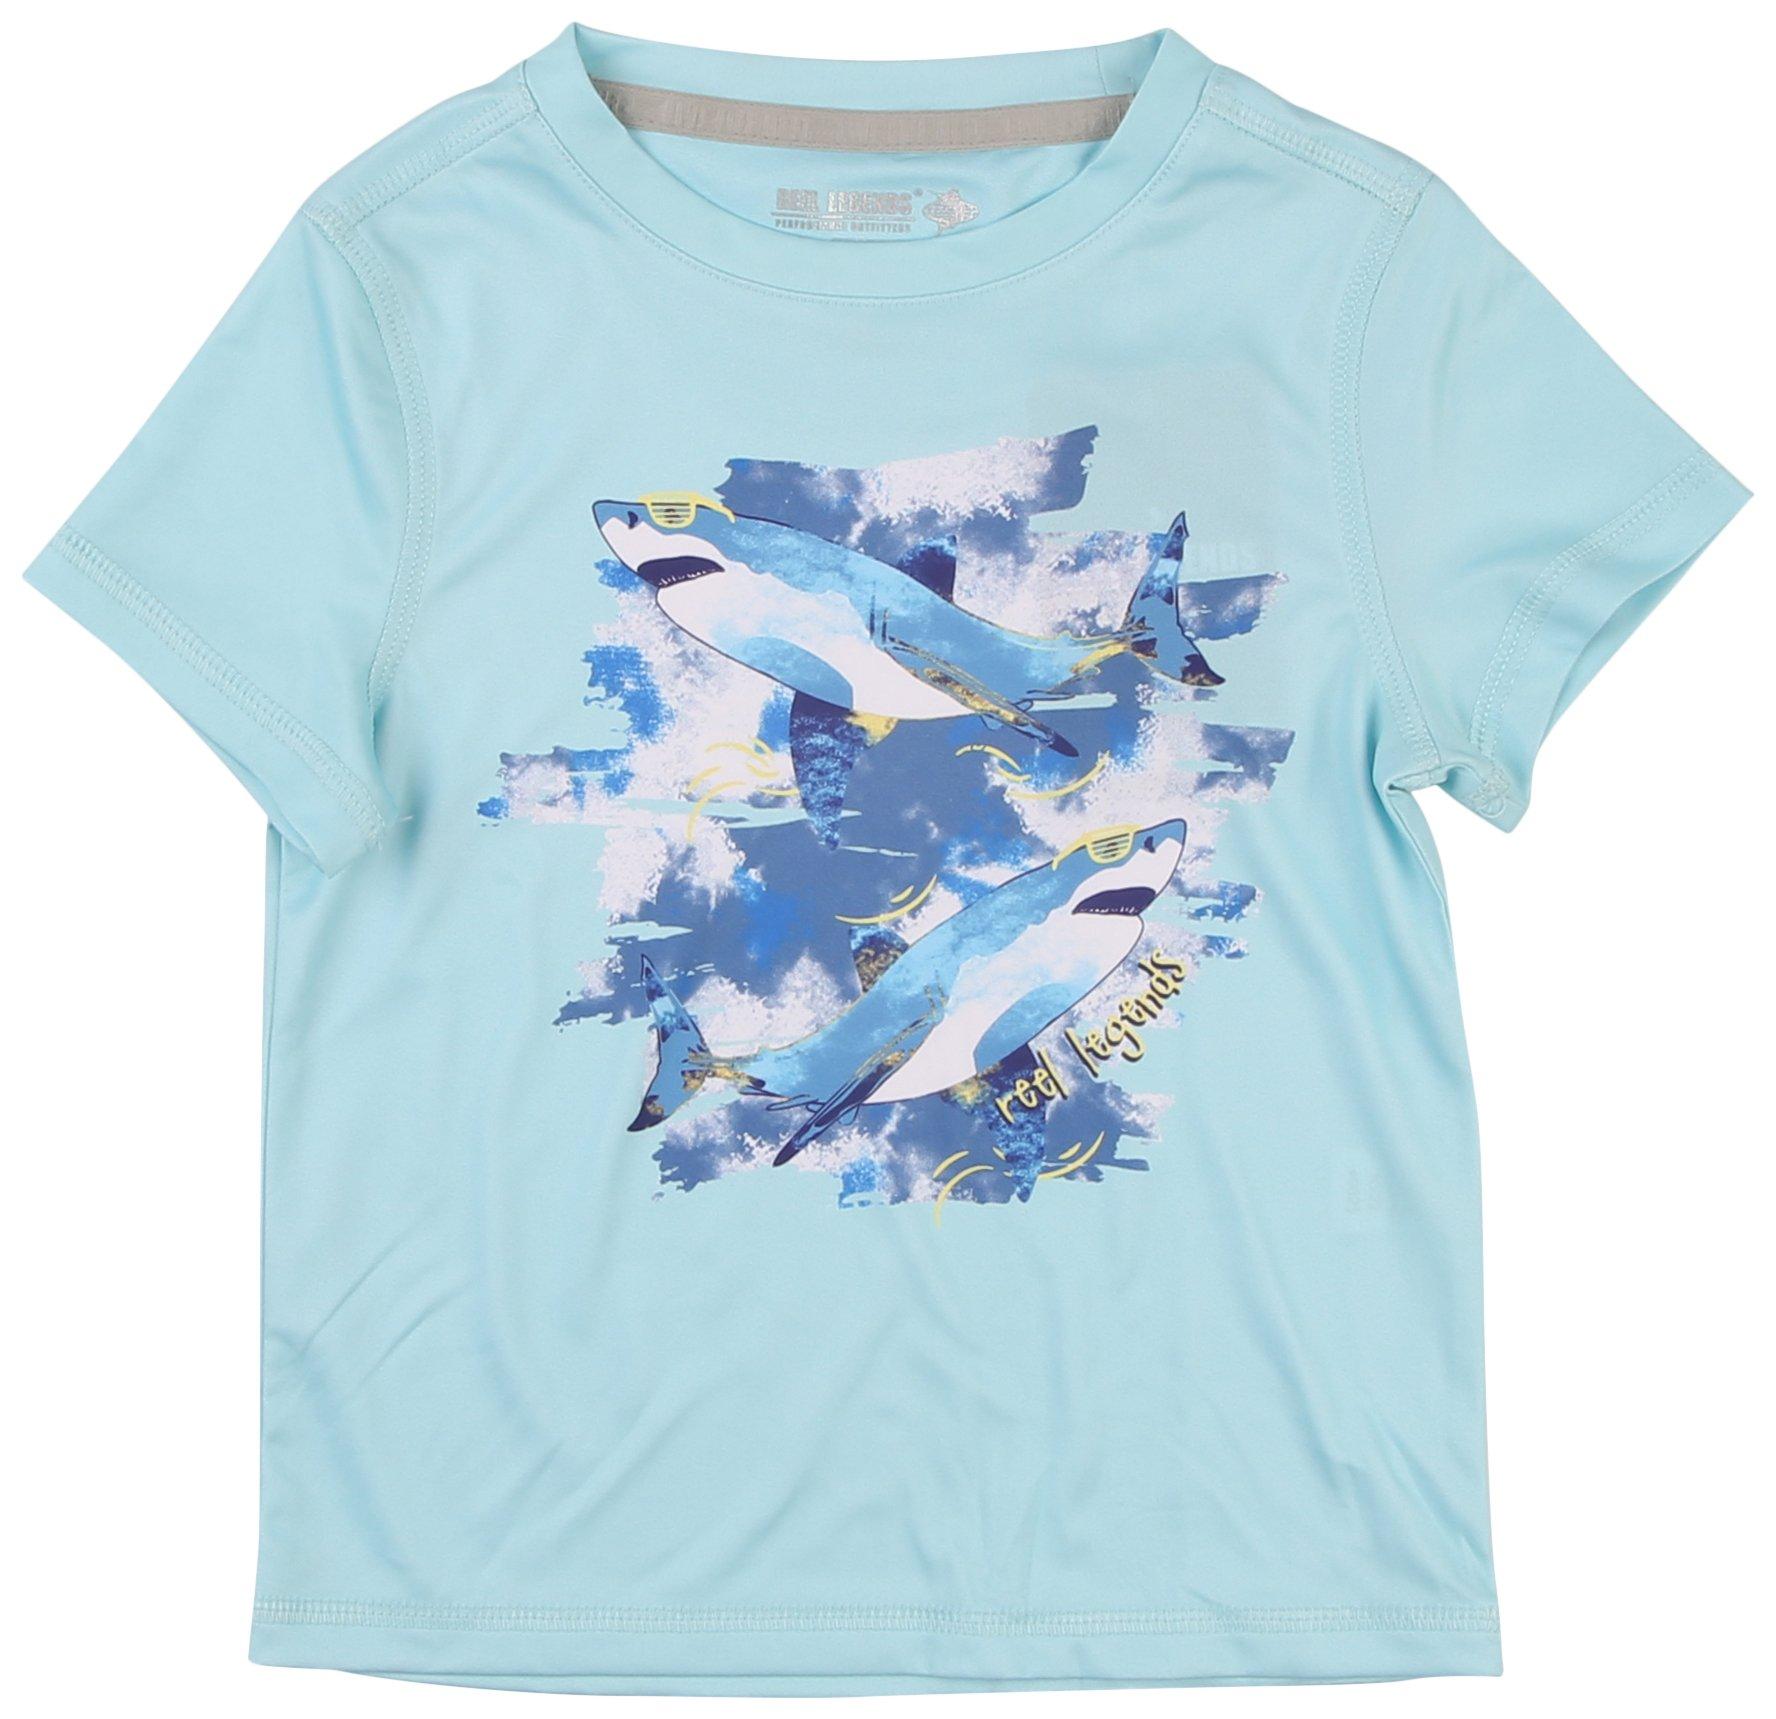 Toddler Boys Waterspout Performance Tops